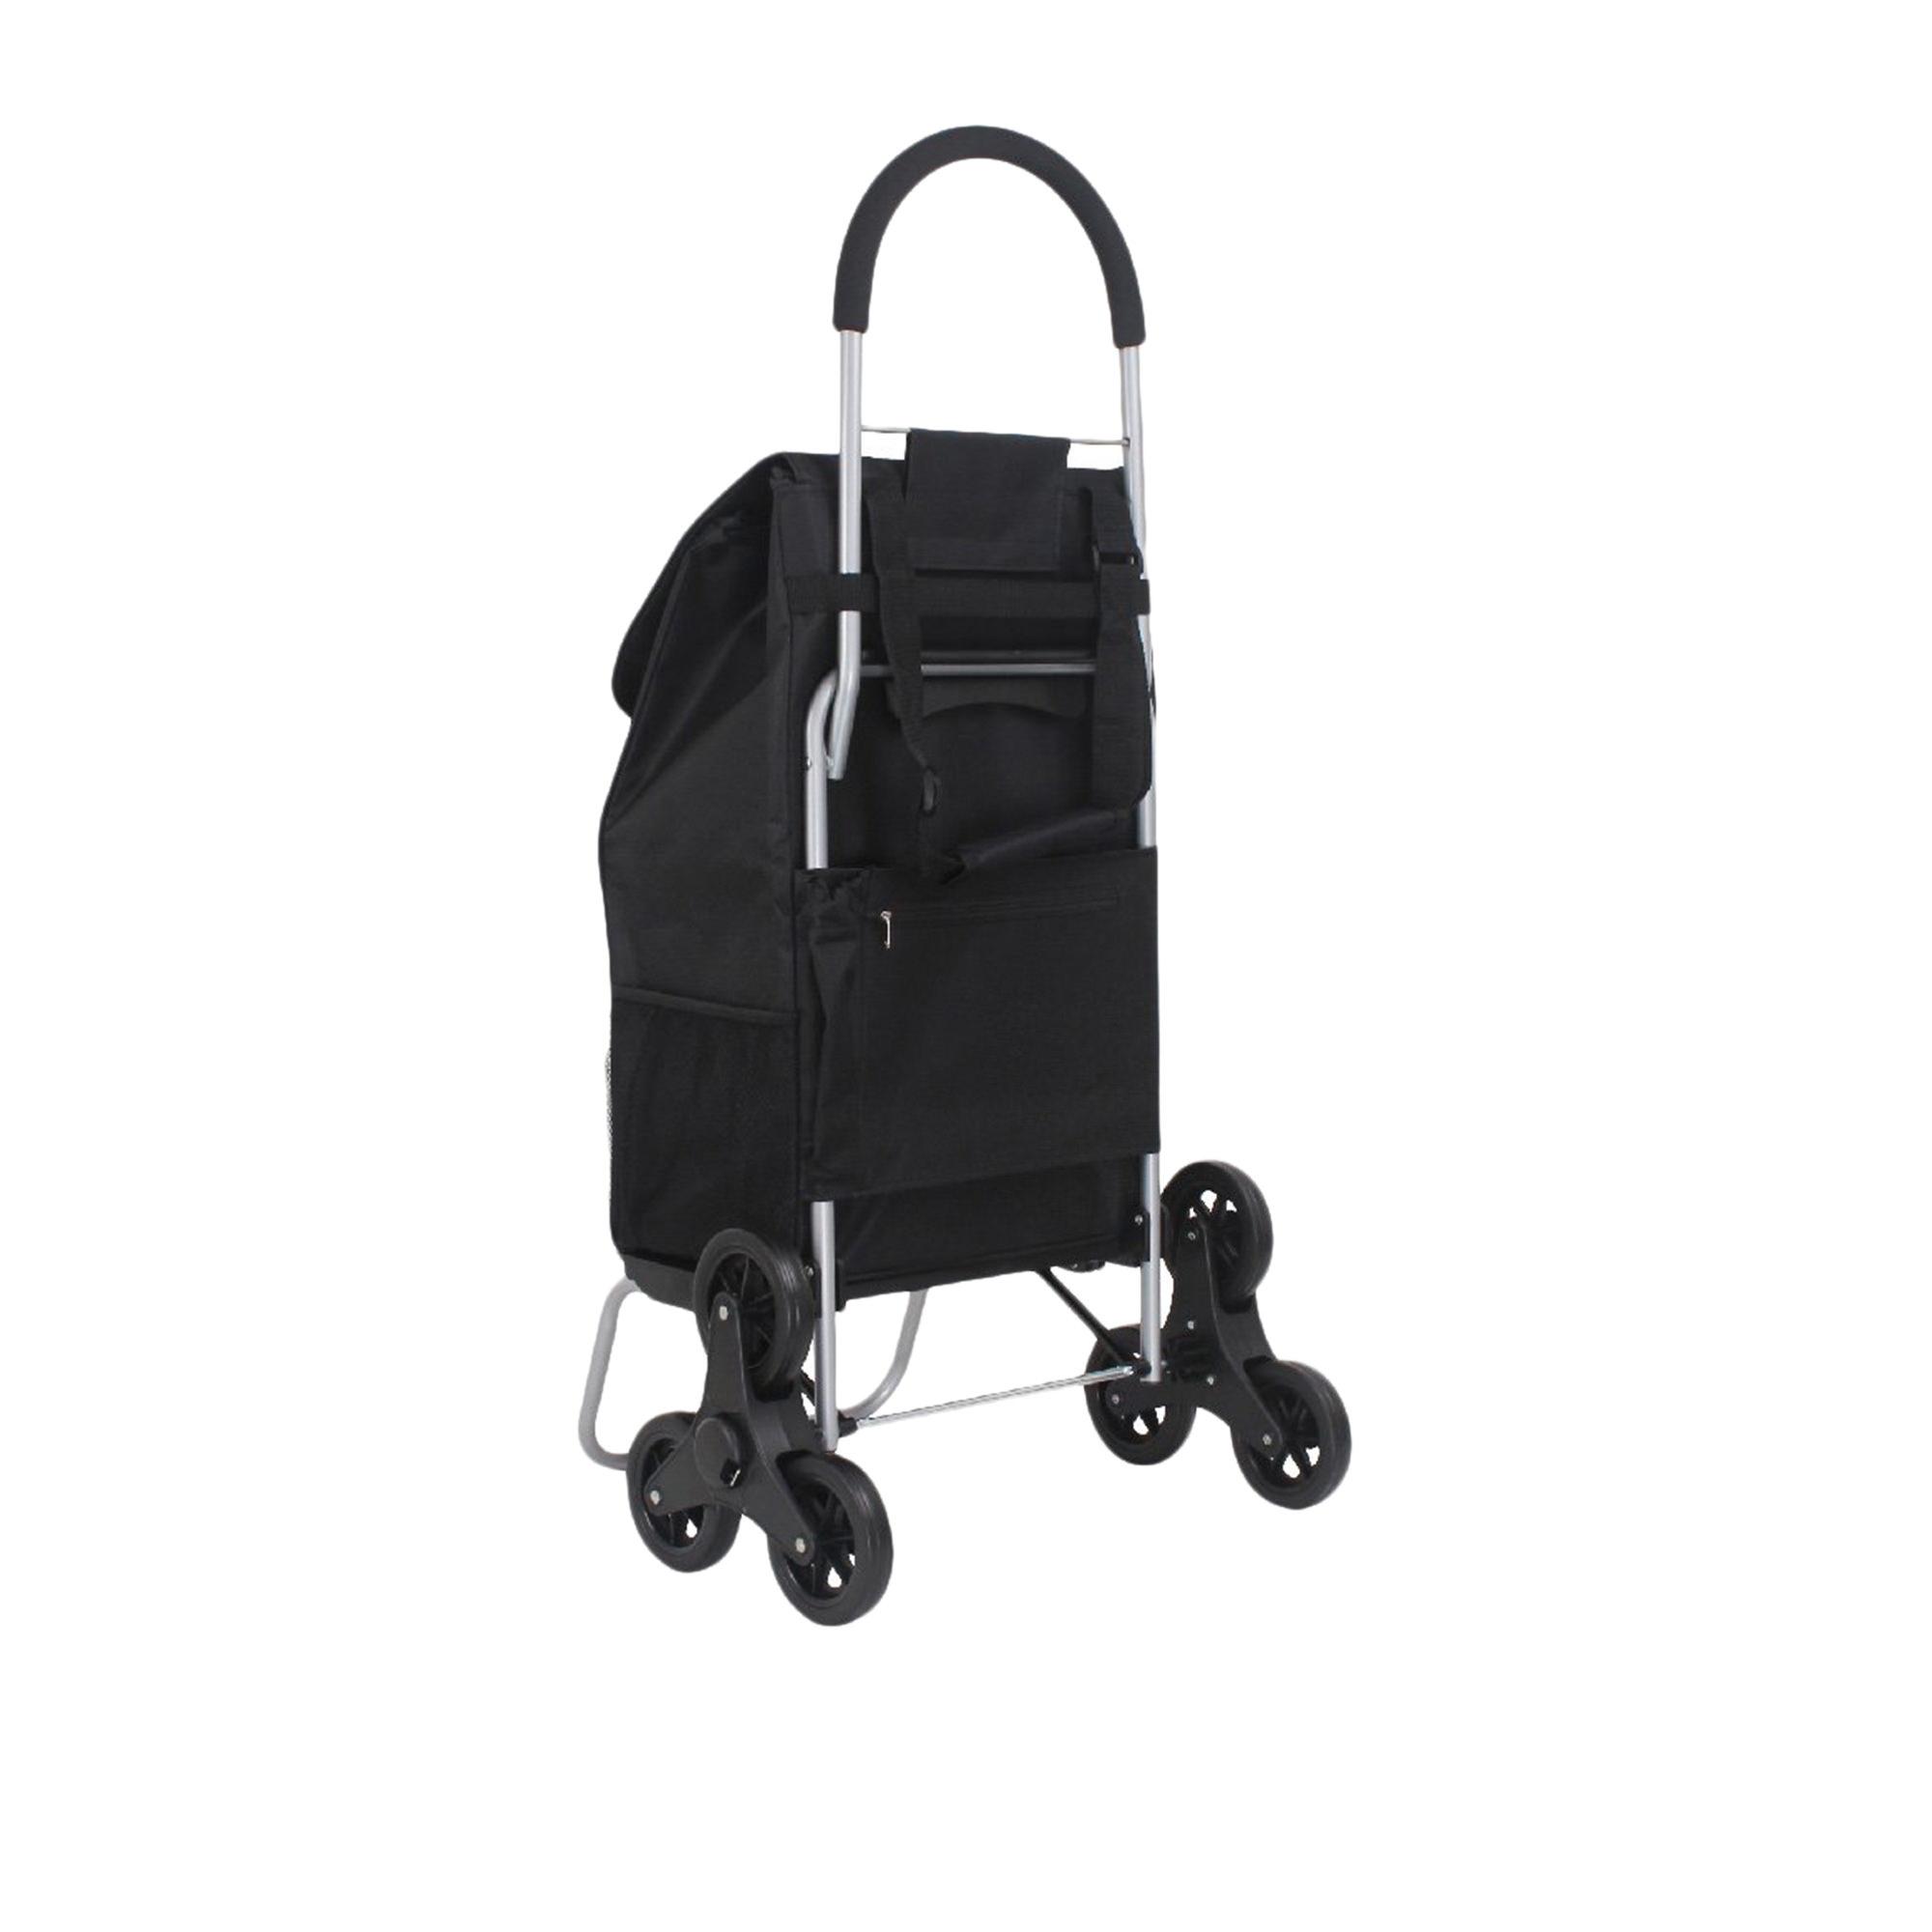 White Magic Handy Trolley with Climbing Wheels Black Image 3